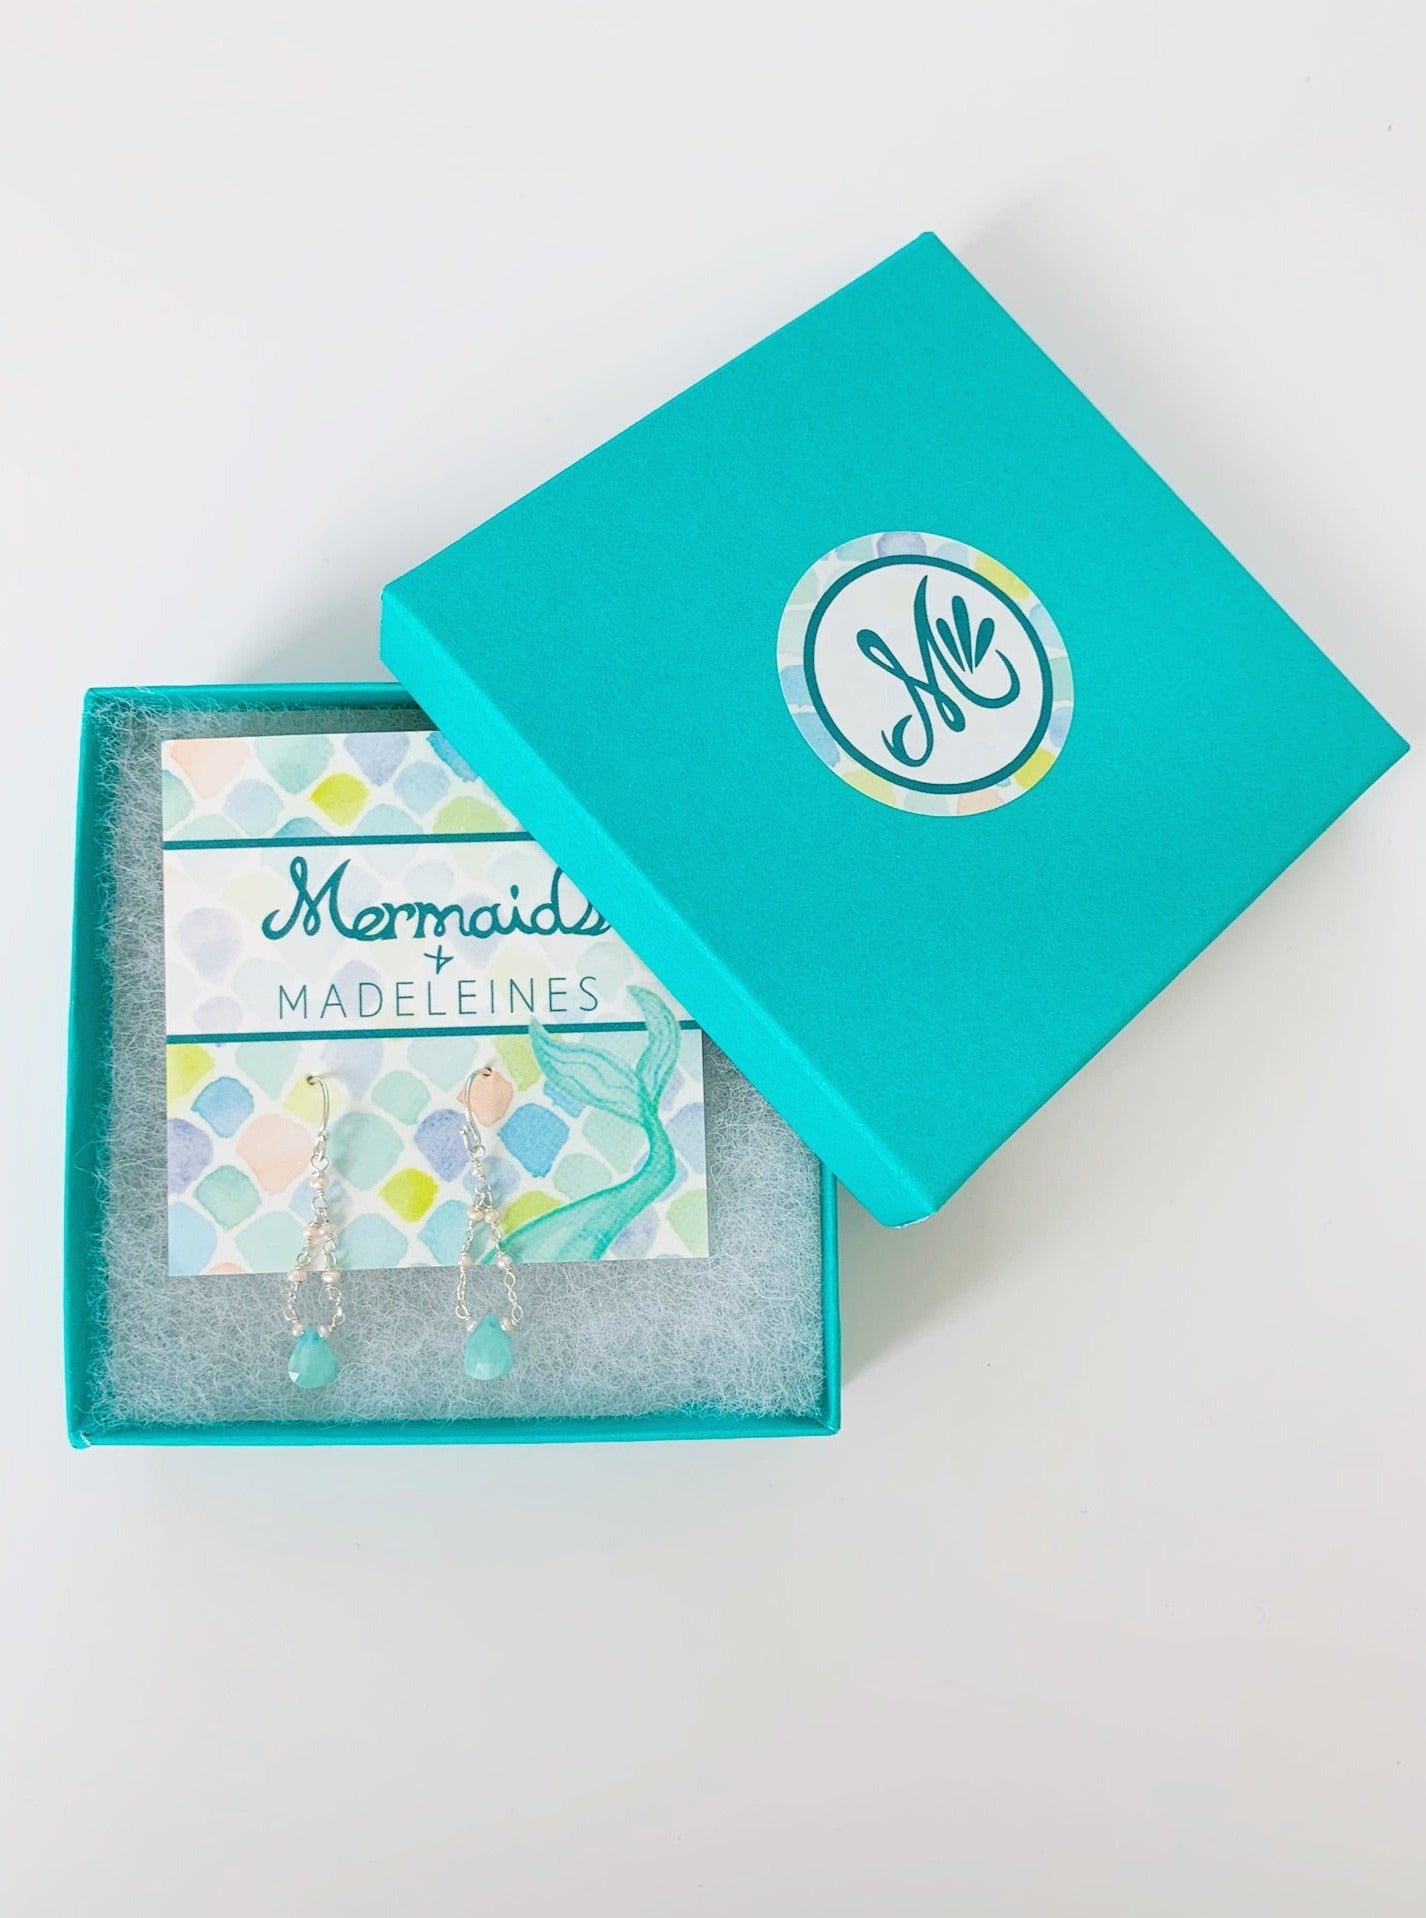 Island Air Earrings by mermaids and madeleines photographed in a teal gift box with white cotton lining. The earrings are on a card and created with amazonite teardrop gems, sterling silver and freshwater pearls